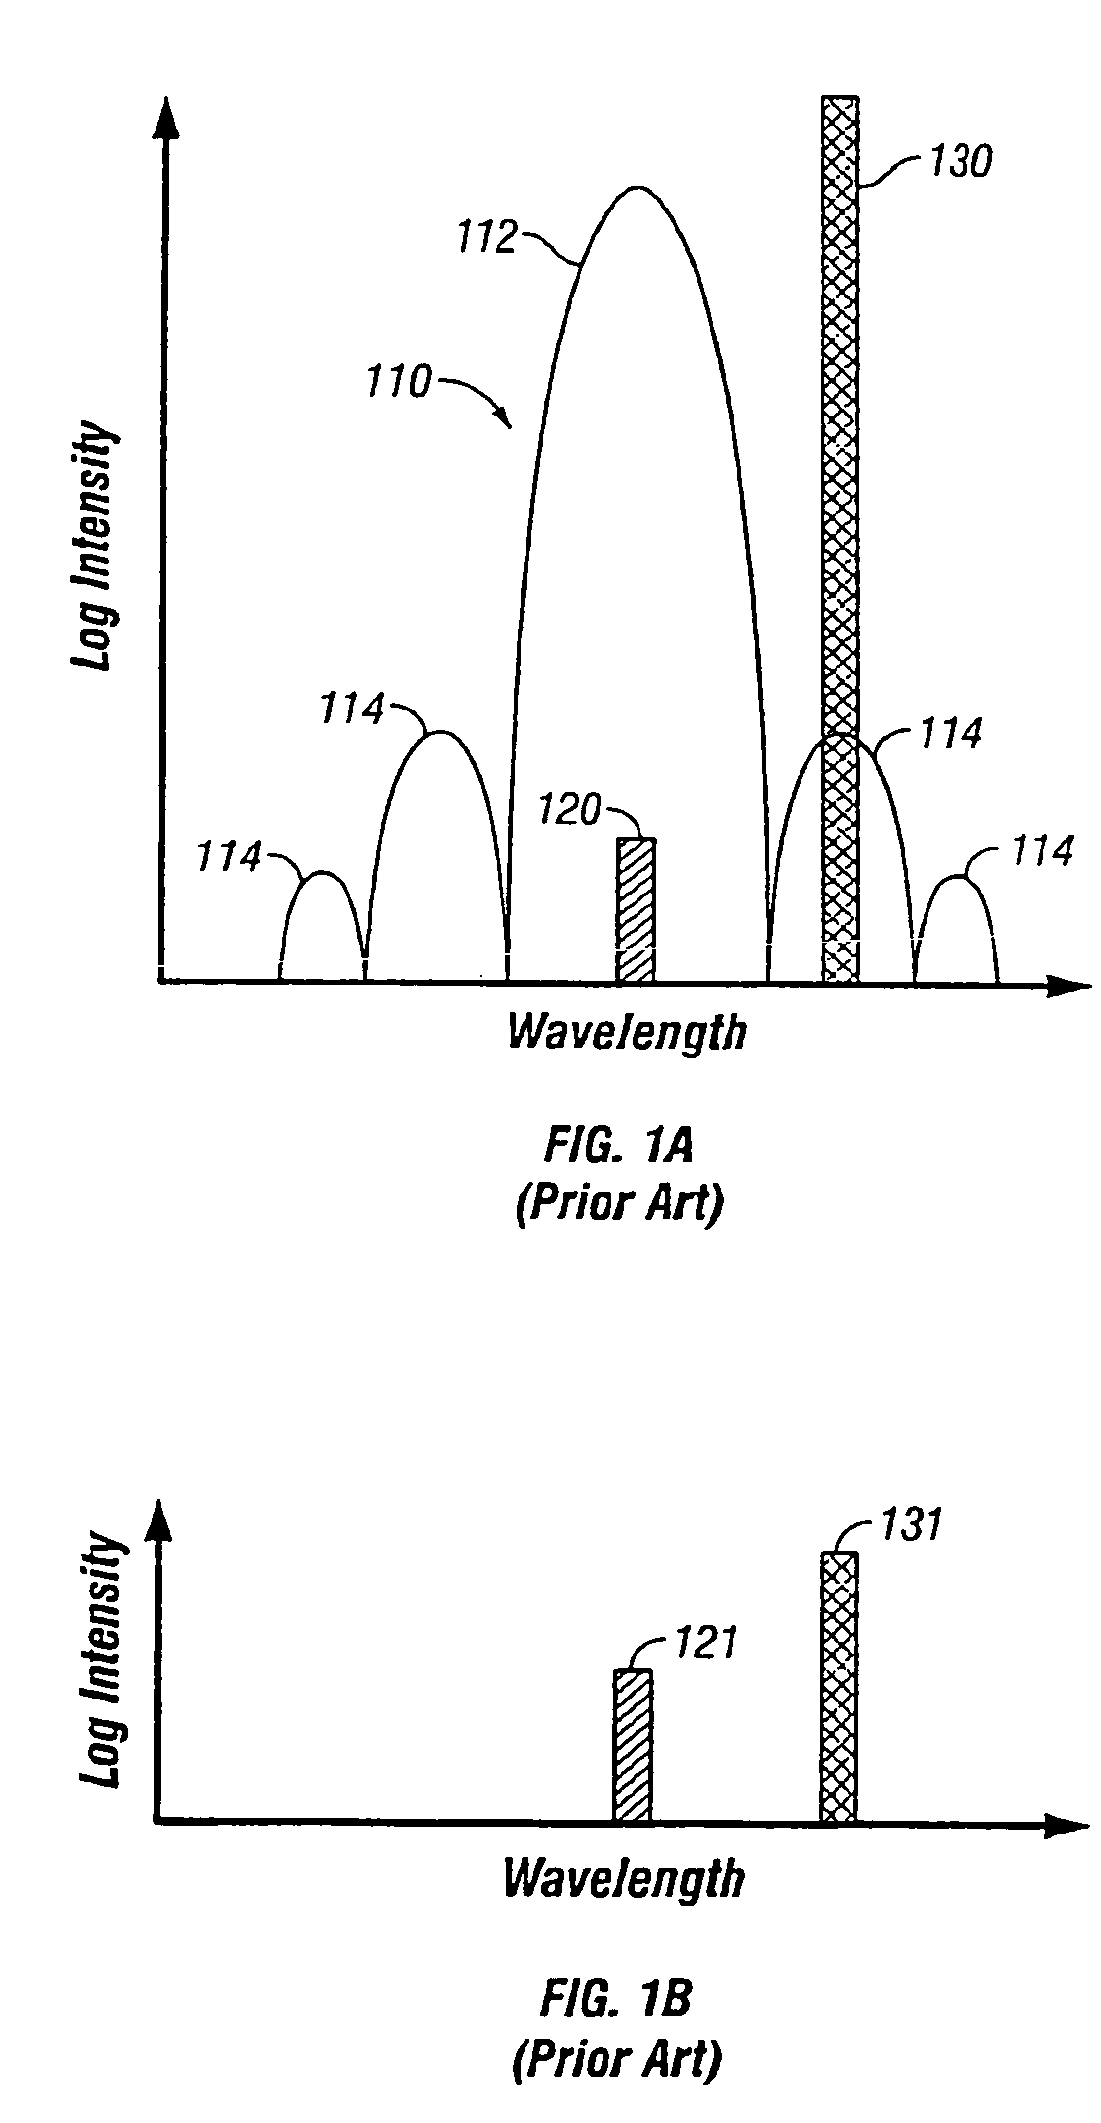 Apodized diffraction grating with improved dynamic range